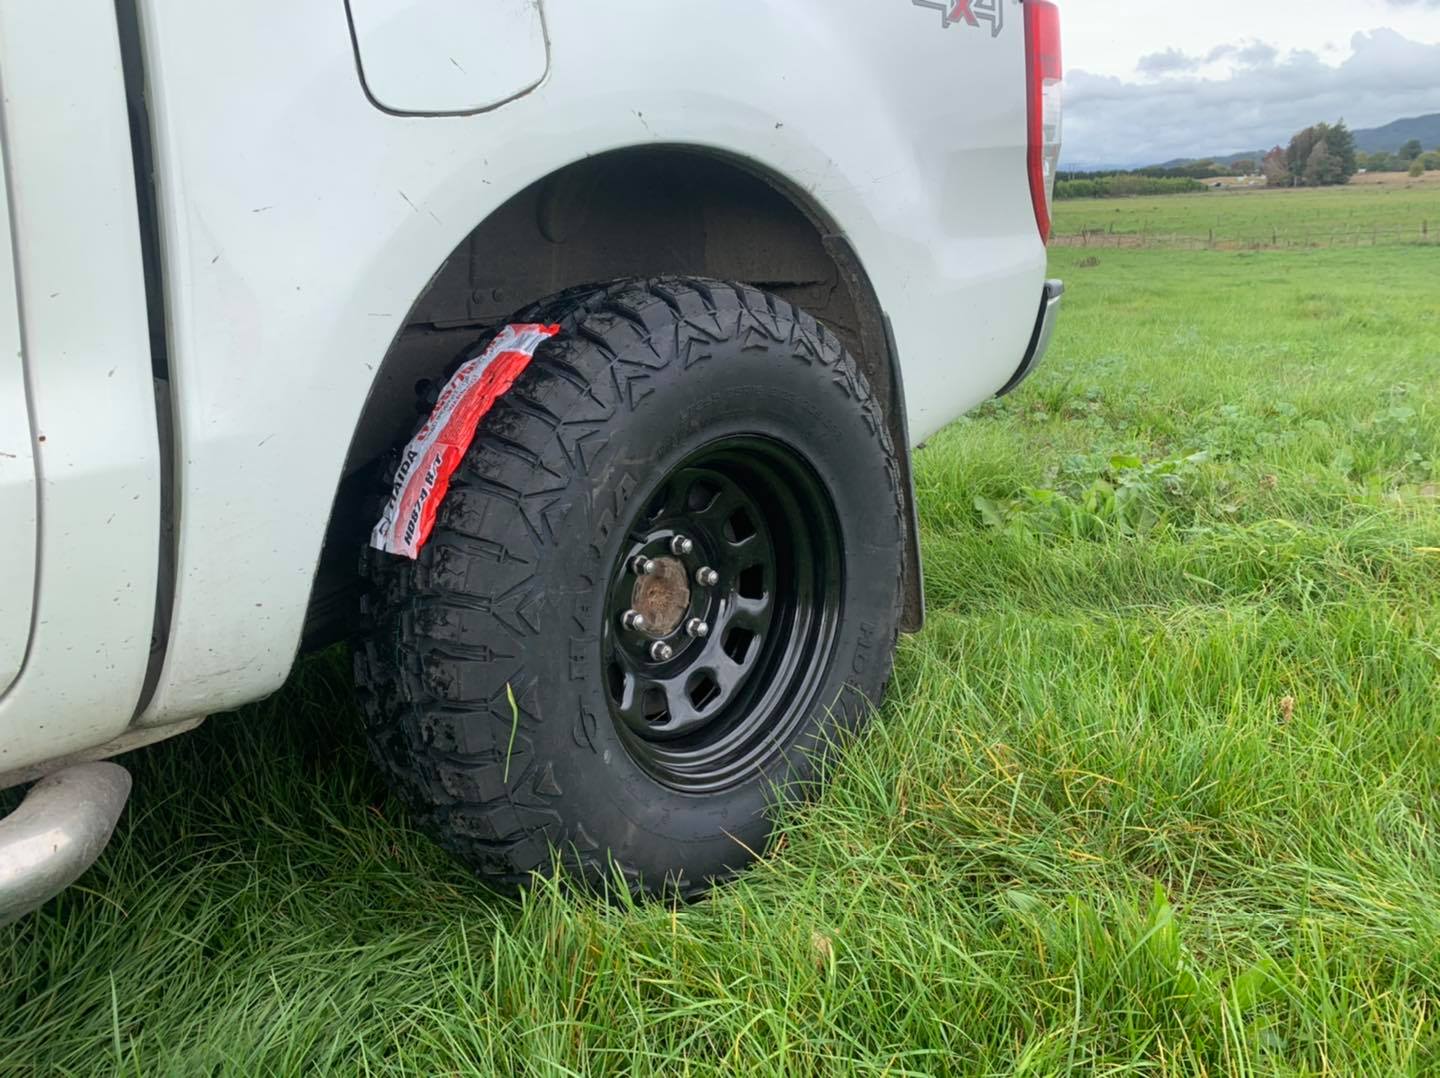 Ford Ranger Wheels 16x8 Mud tyre Wholesale Tyres